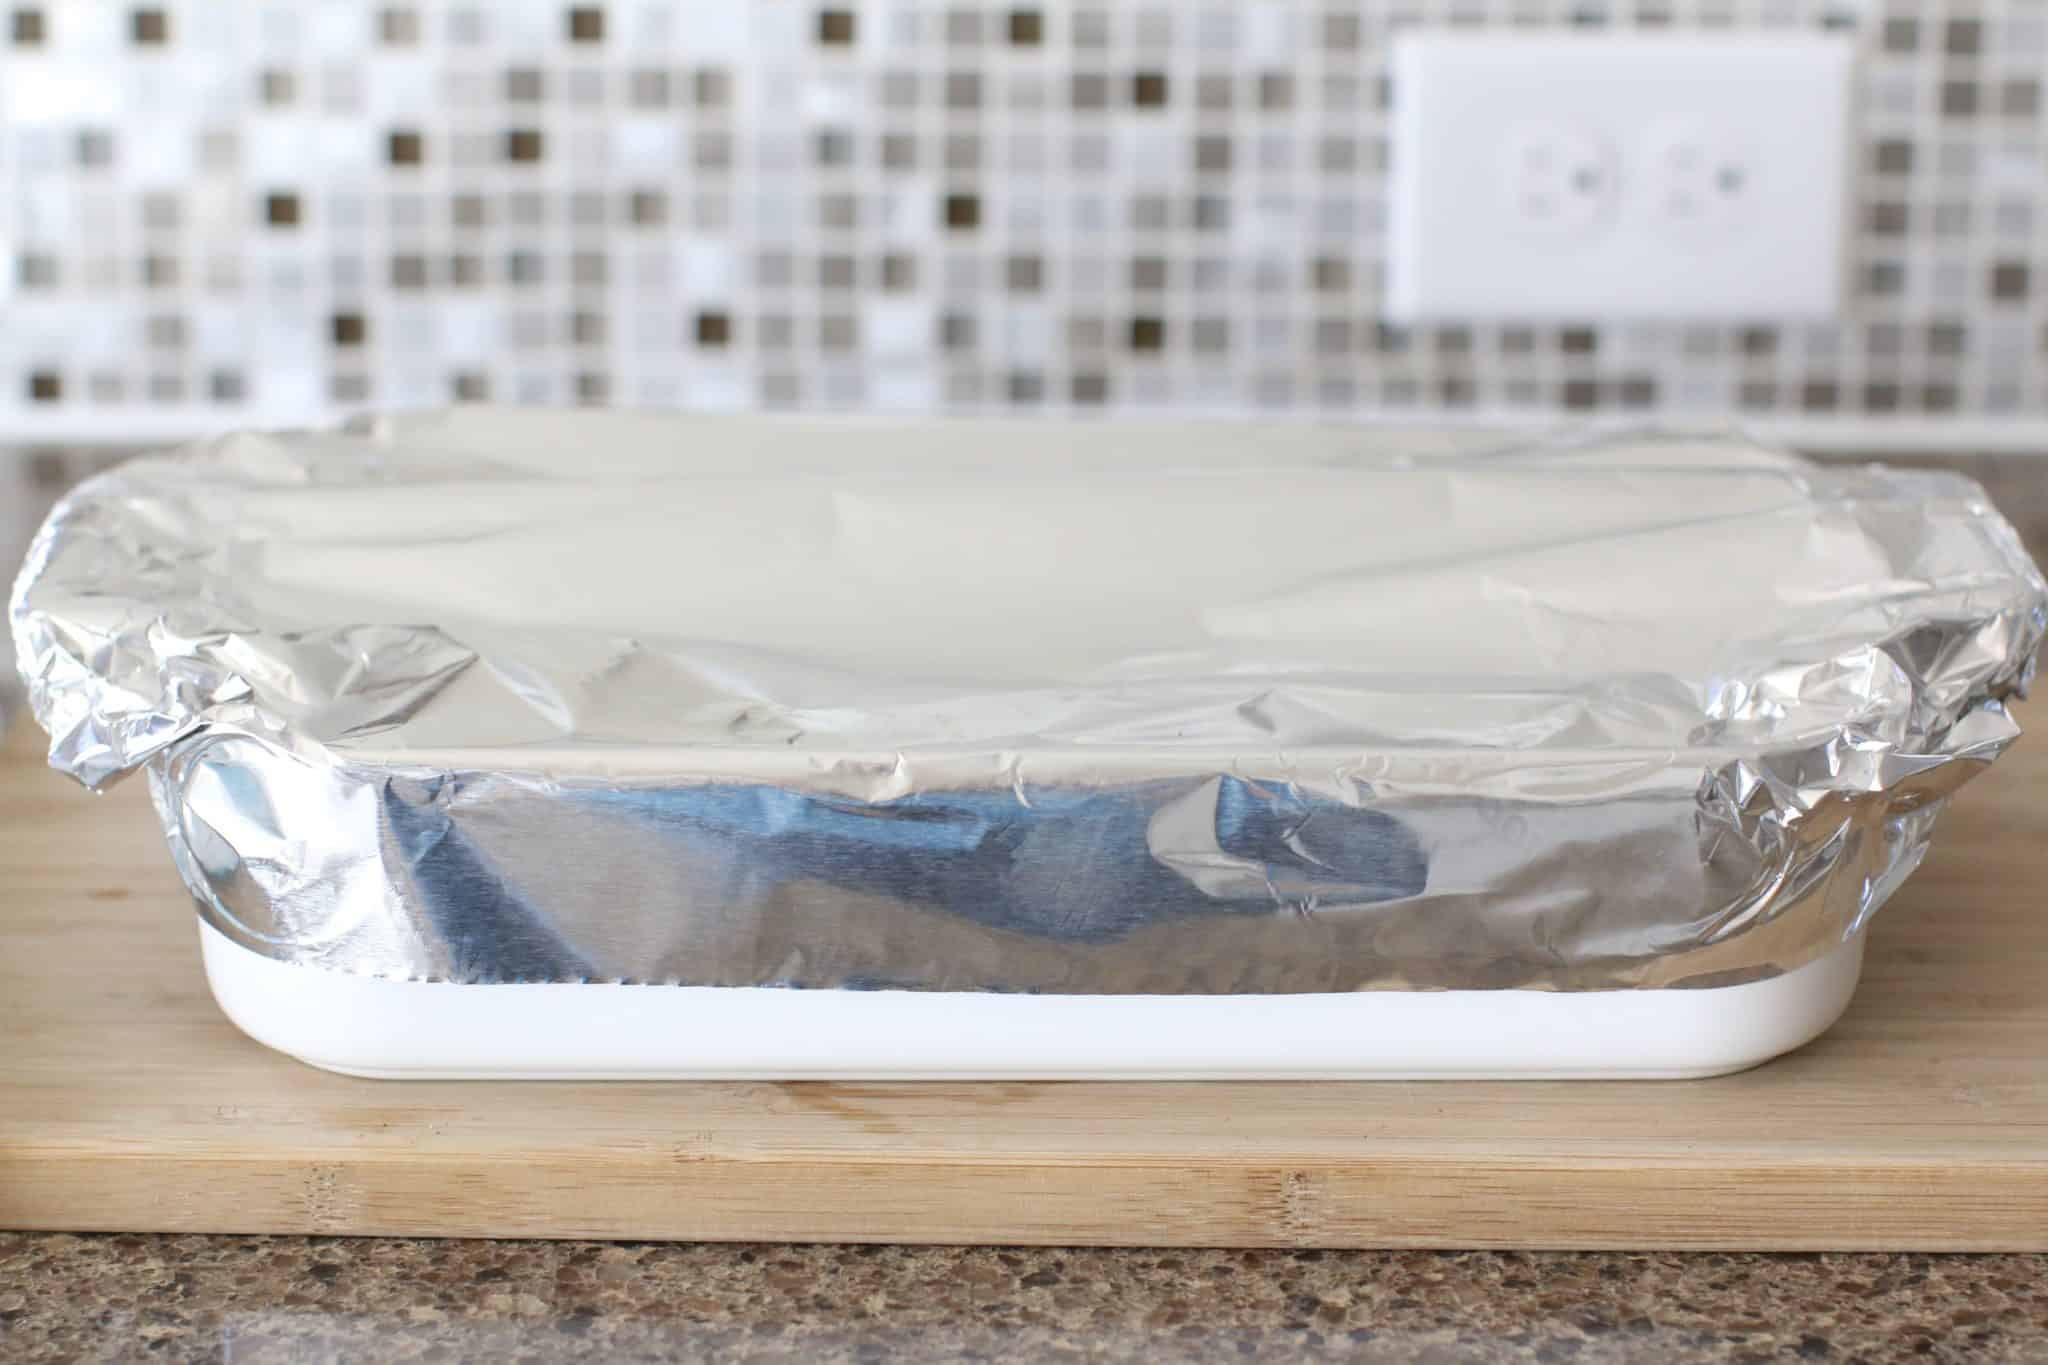 a baking dish shown covered with aluminum foil.